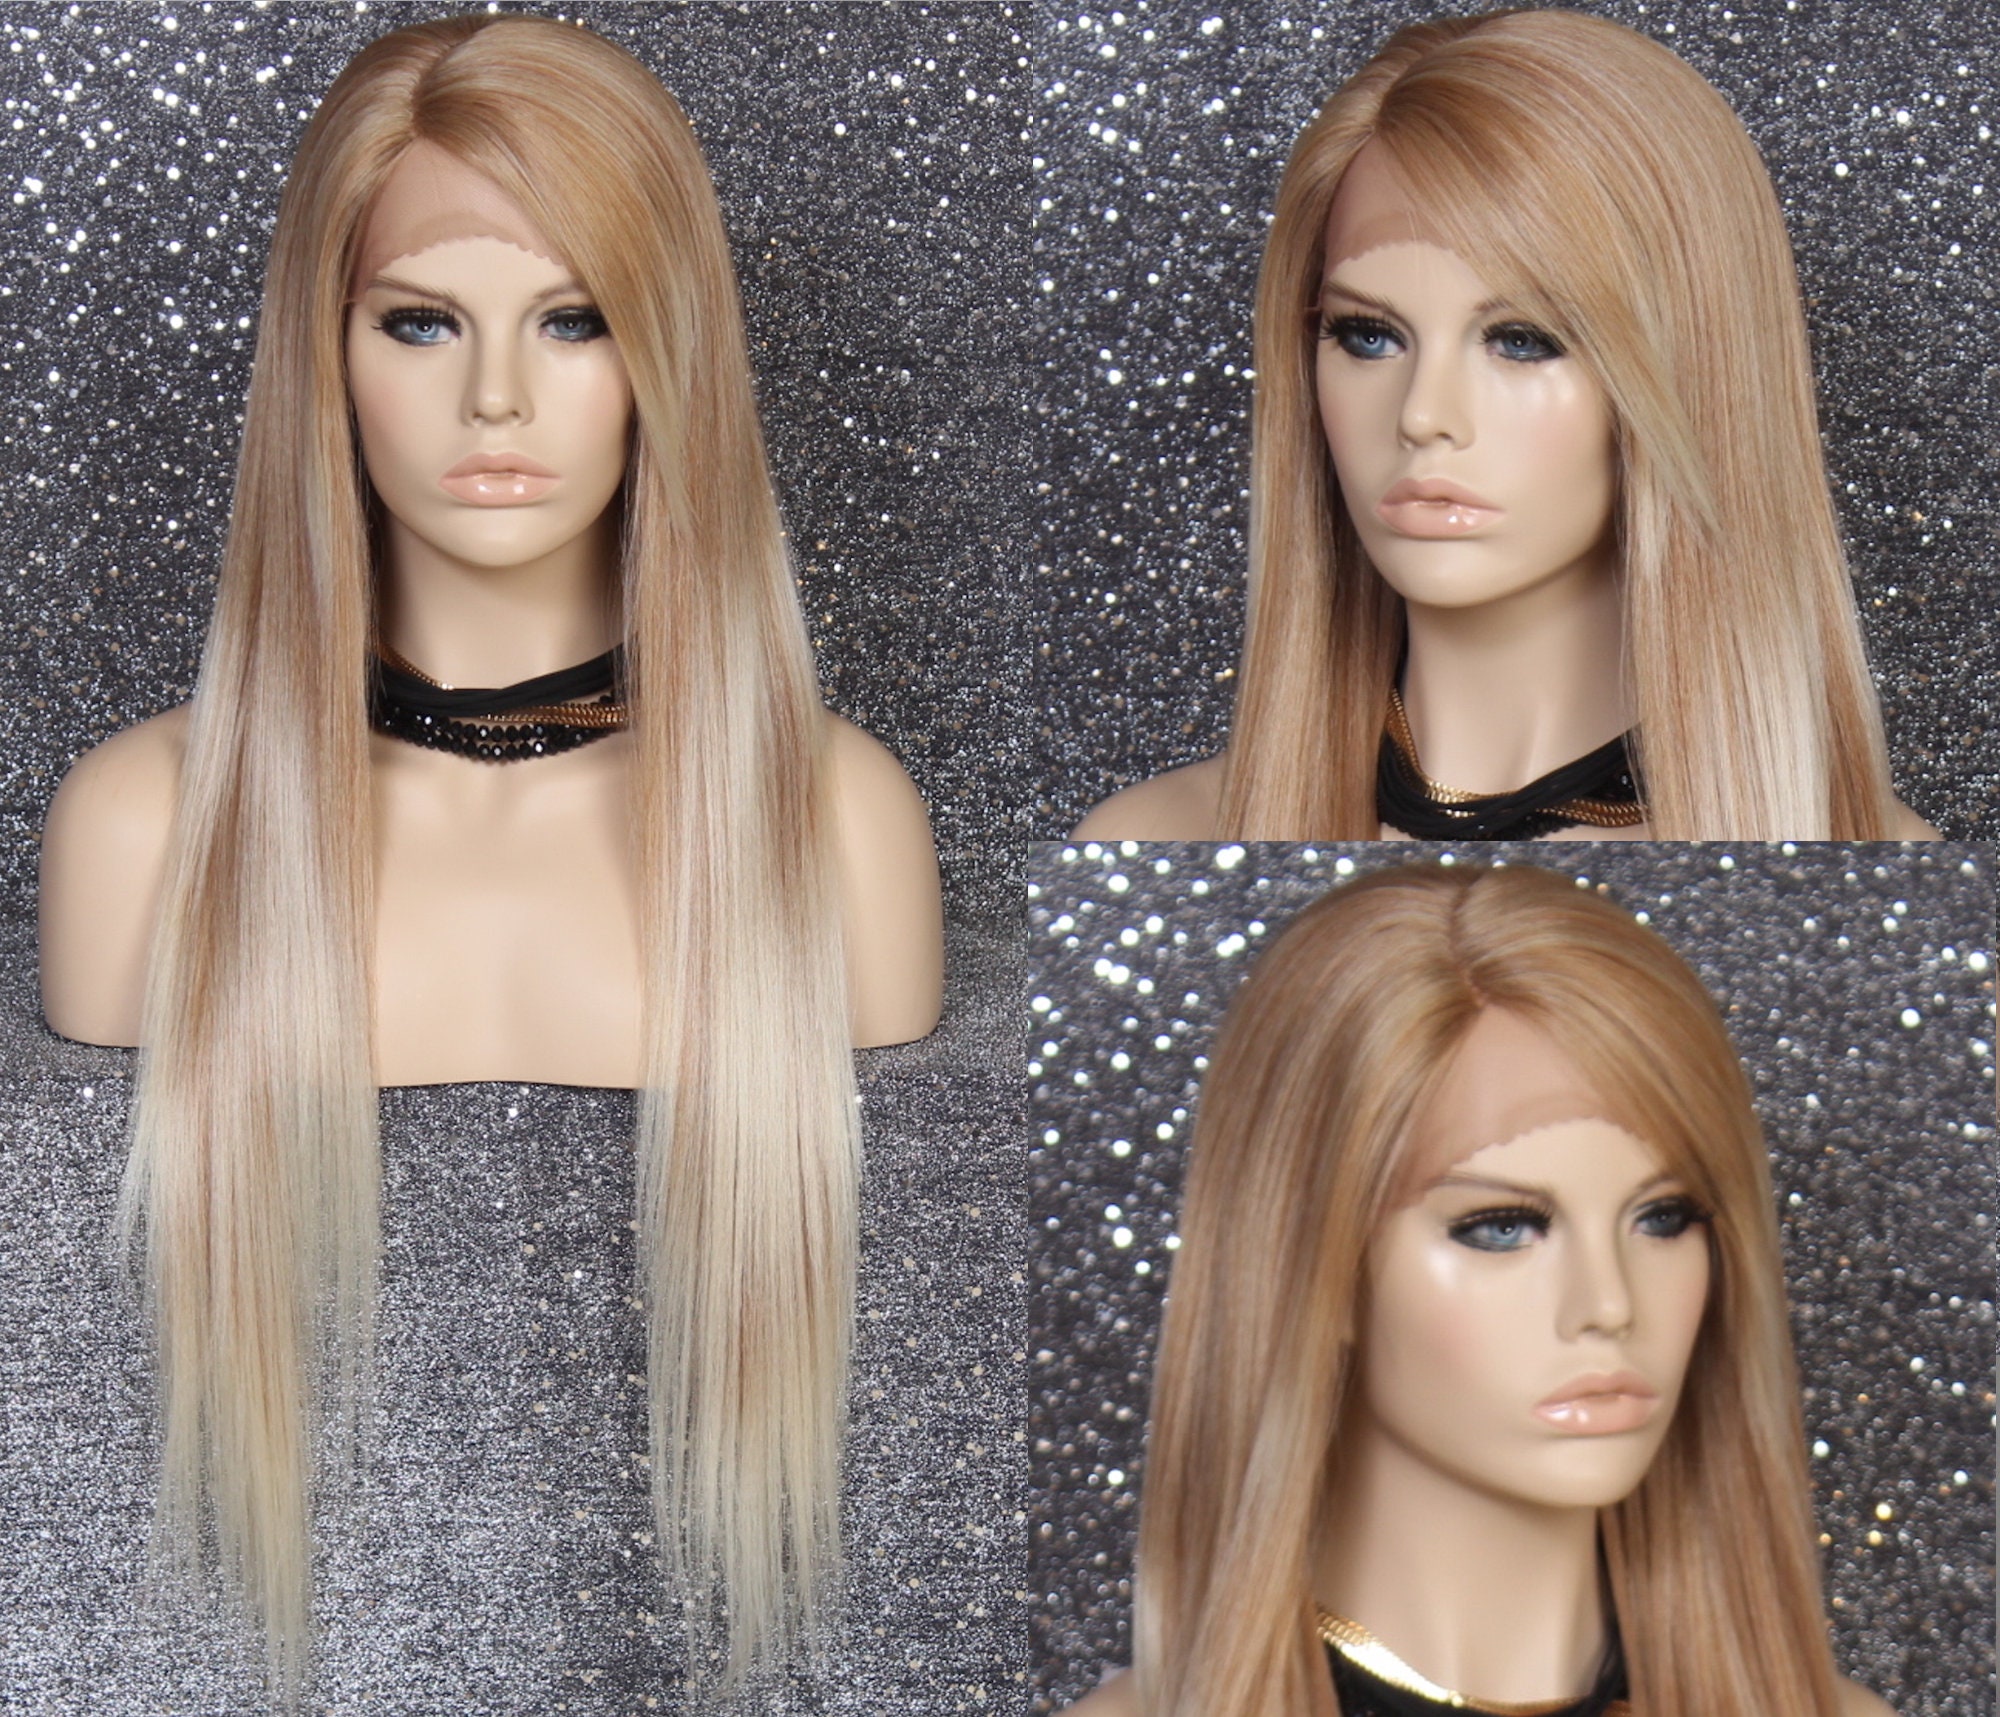 Human Hair Blend Silky Straight Super Soft Full Lace Front Wig With Slight Wishy Short Front Blonde Mix Cancer/Chemo/Alopeica/Cosplay